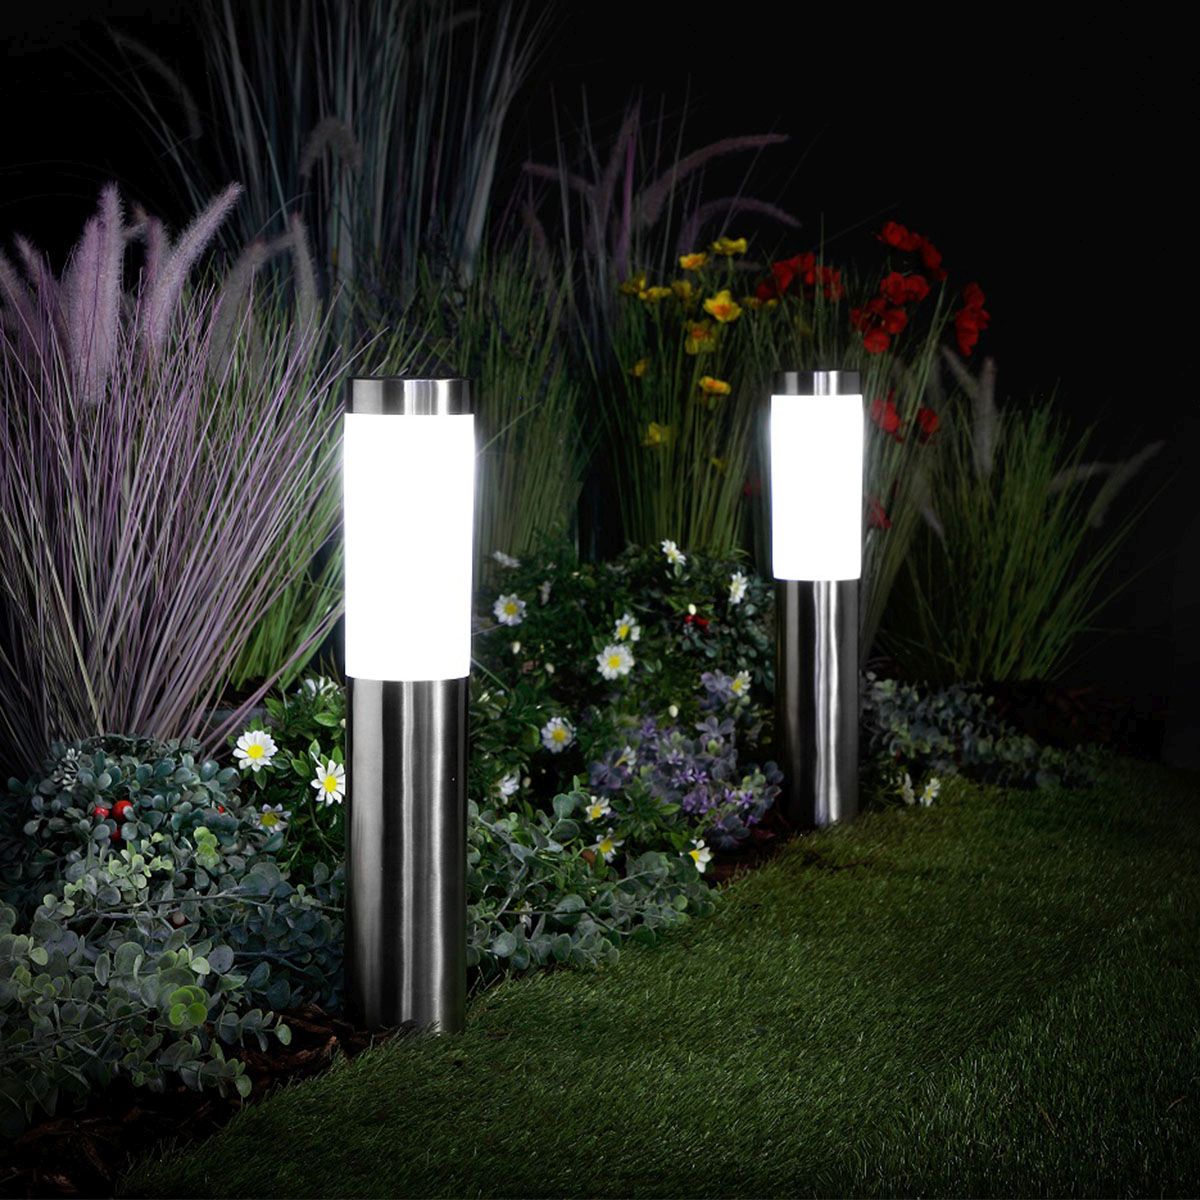 Noma Maxi Frosted Stainless Steel Bollard Garden Lights - Set of 2